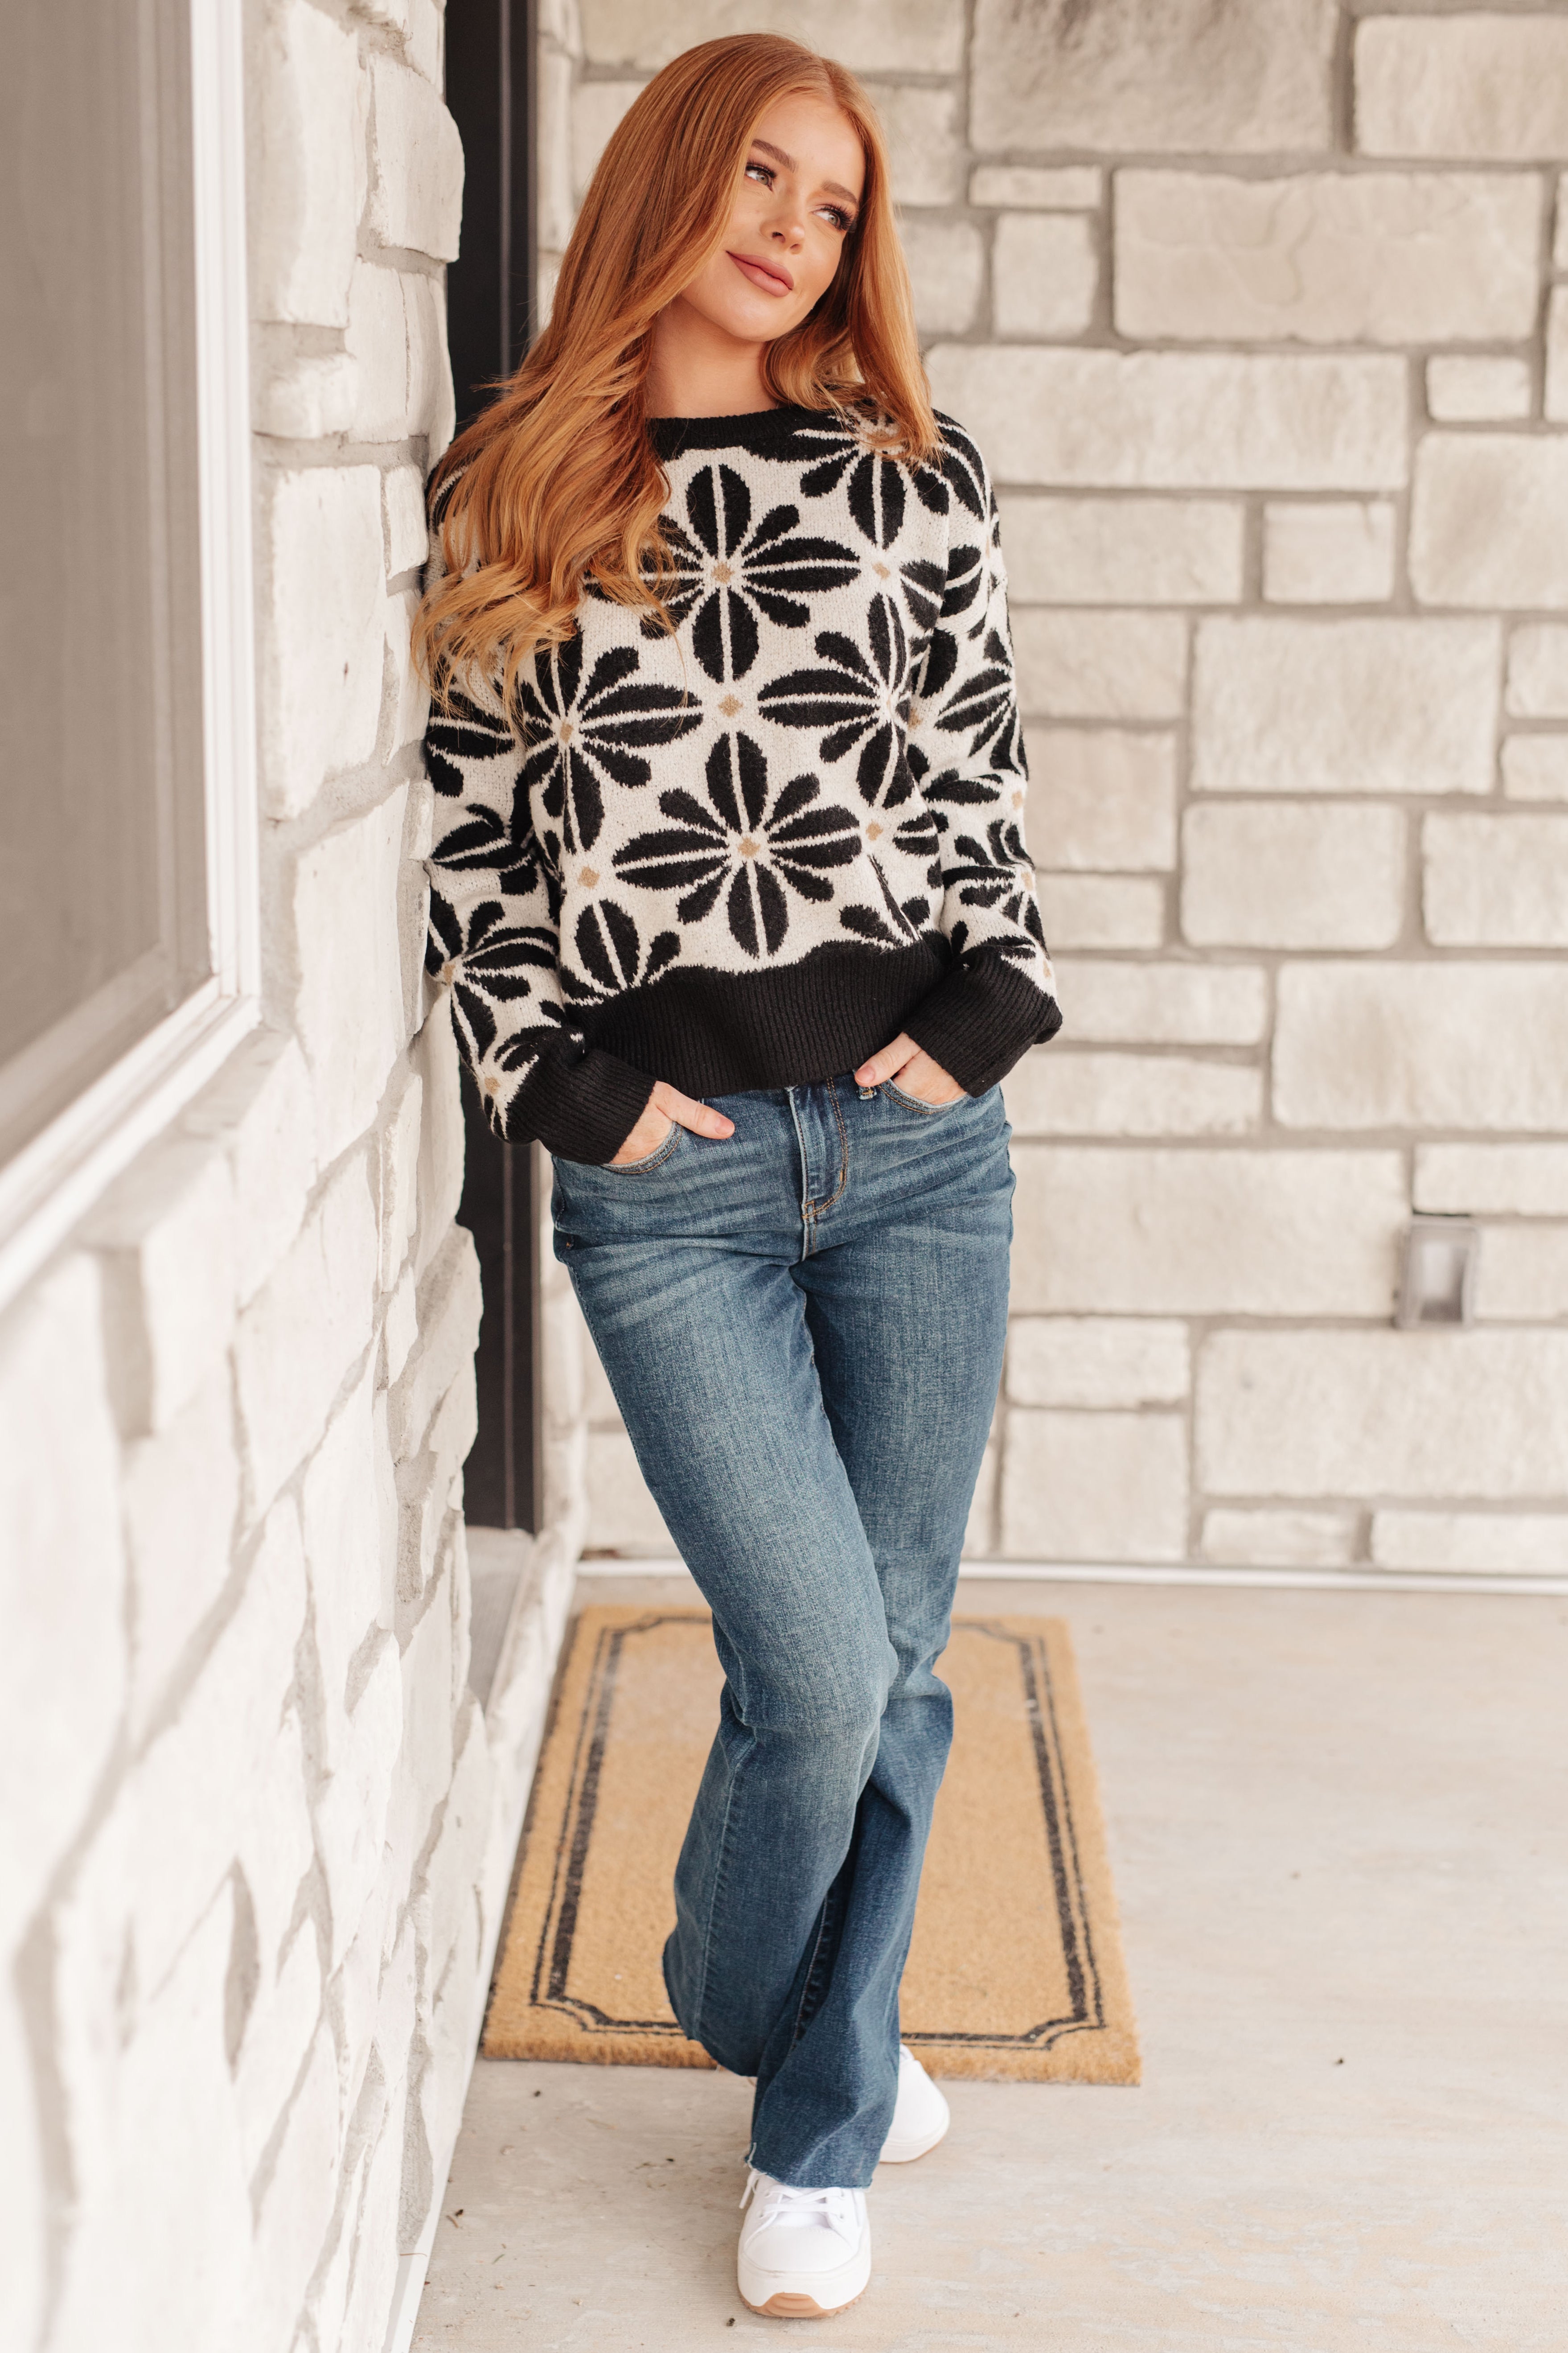 Mid Mod Floral Sweater